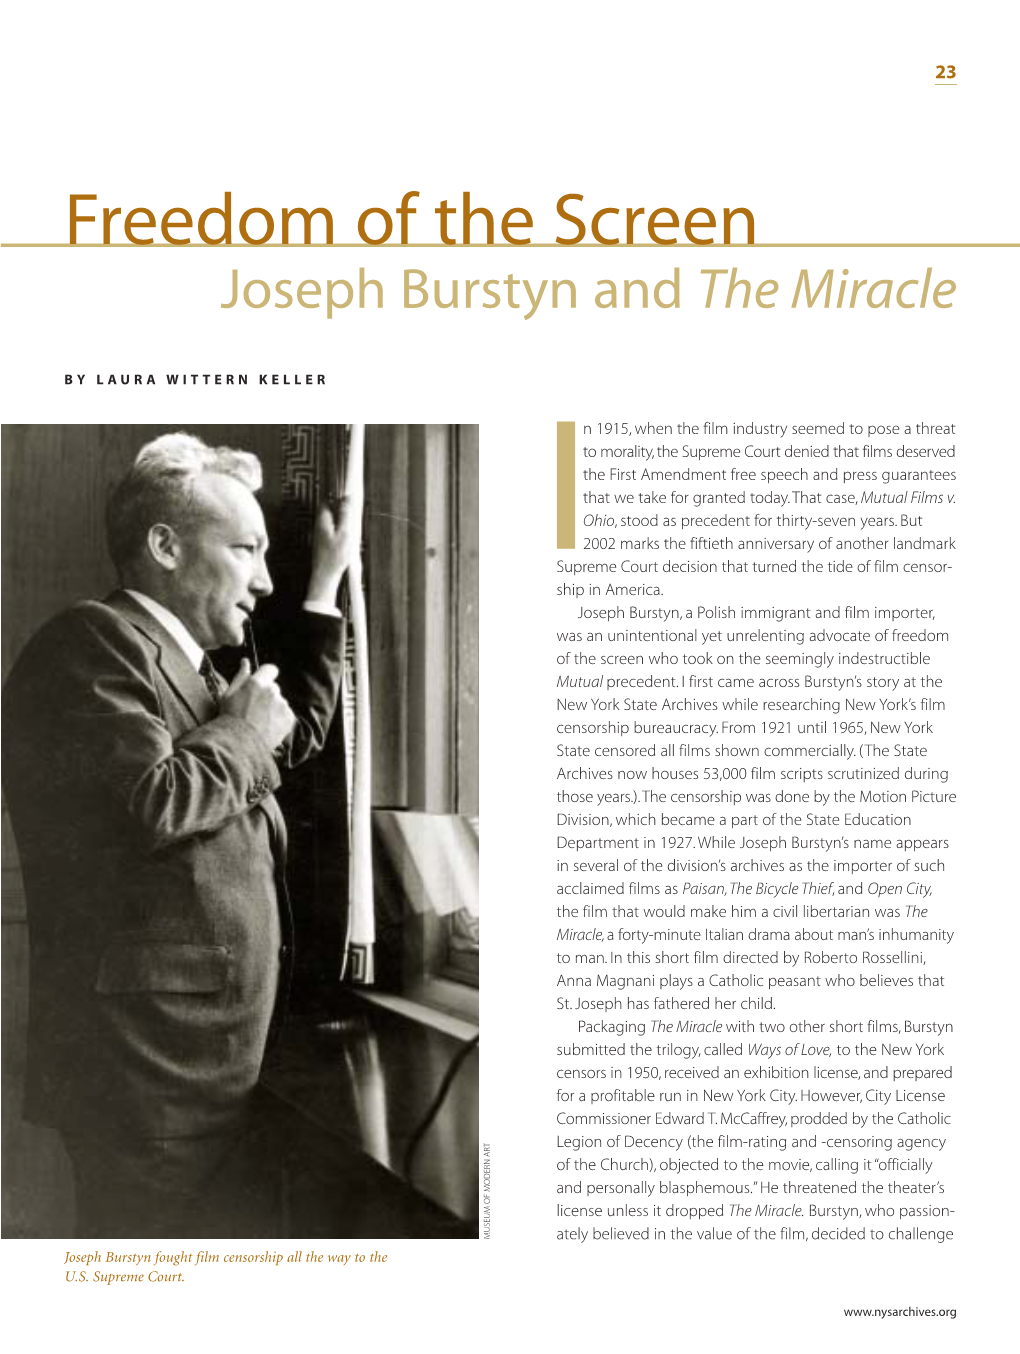 Freedom of the Screen: Joseph Burstyn and the Miracle